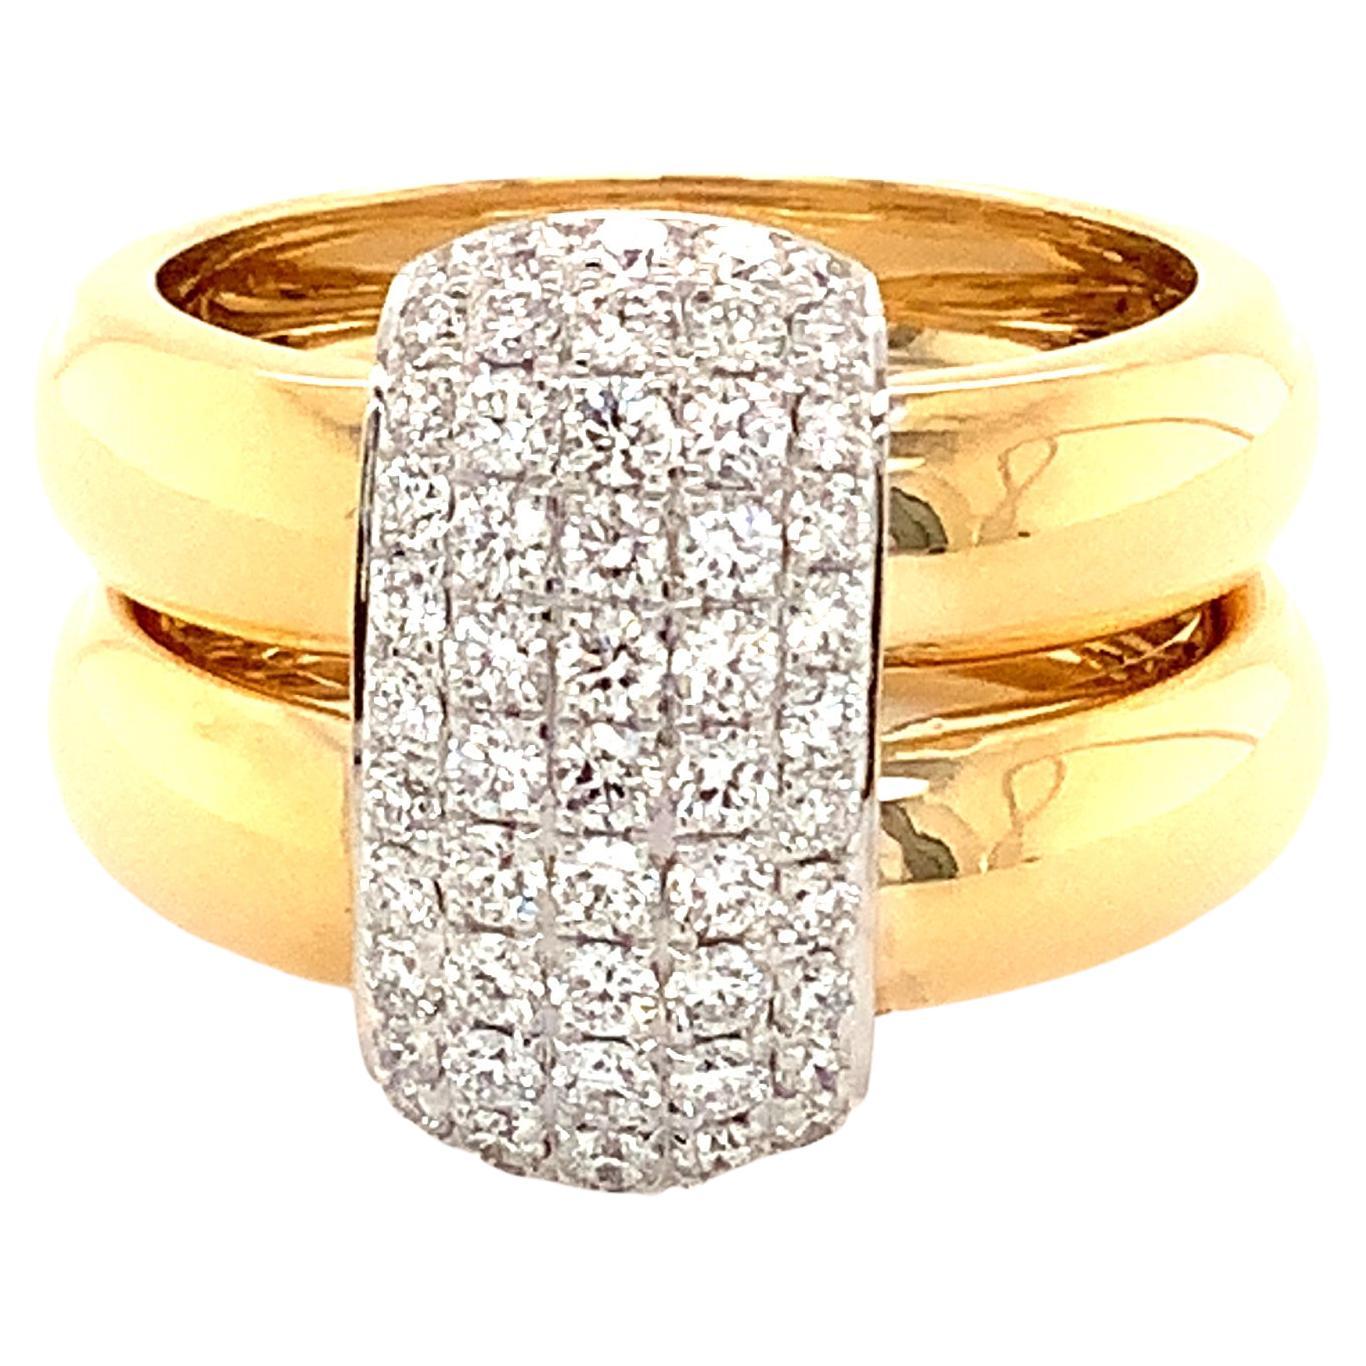 Afarin Collection 18k Highly Polished Two Tone 5 Row Pavé Diamond Double Ring